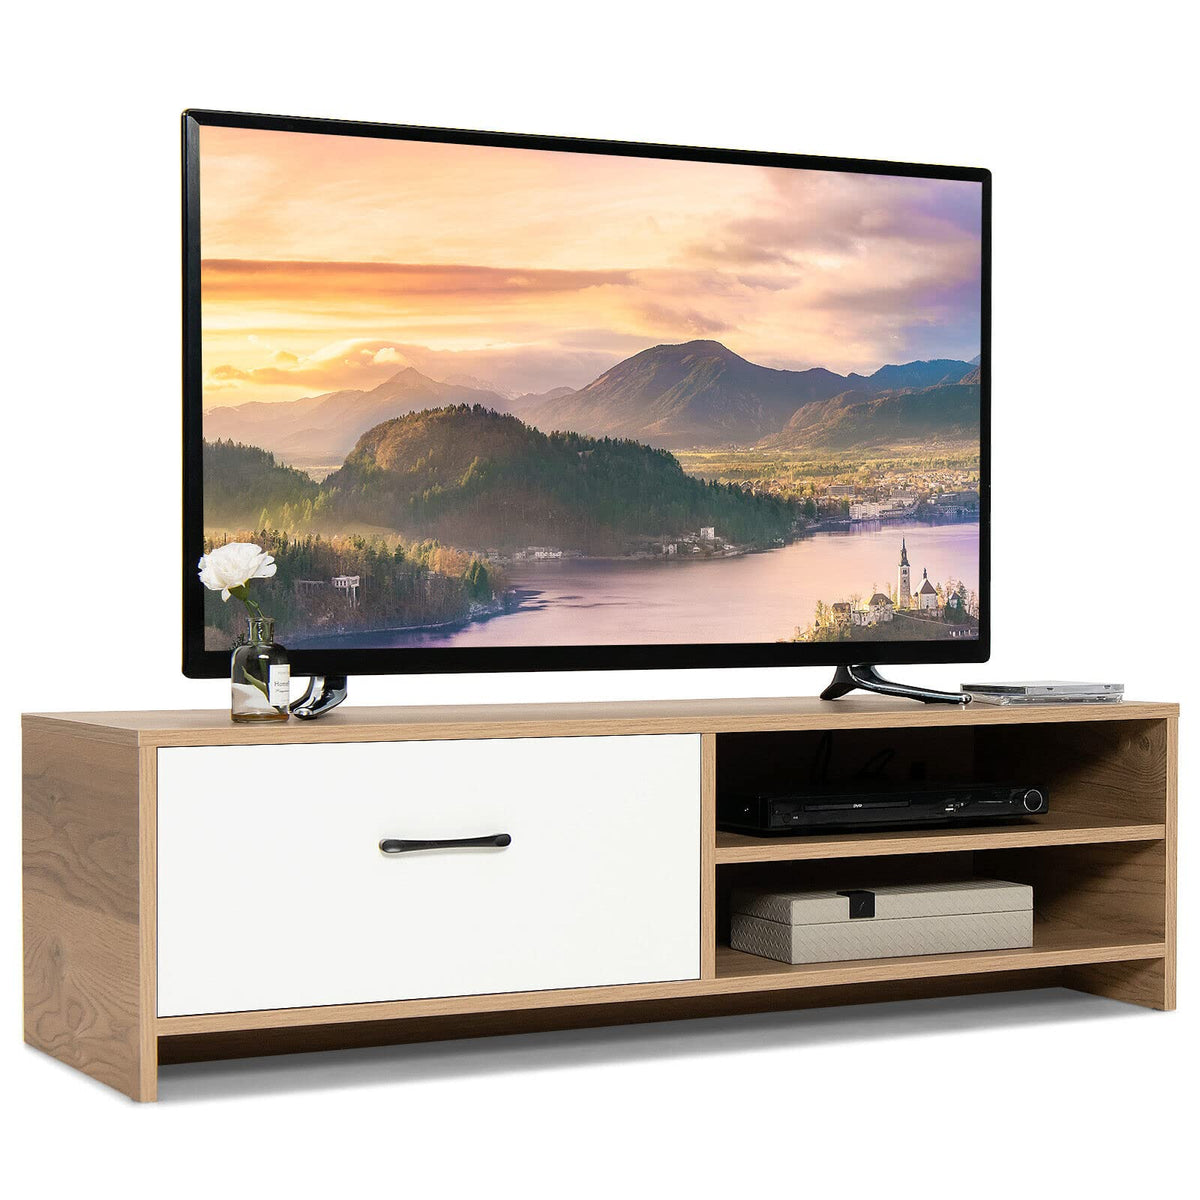 Giantex TV Stand Media Entertainment Center for TVS up to 55", Modern TV Cabinet with 1 Large Drawer